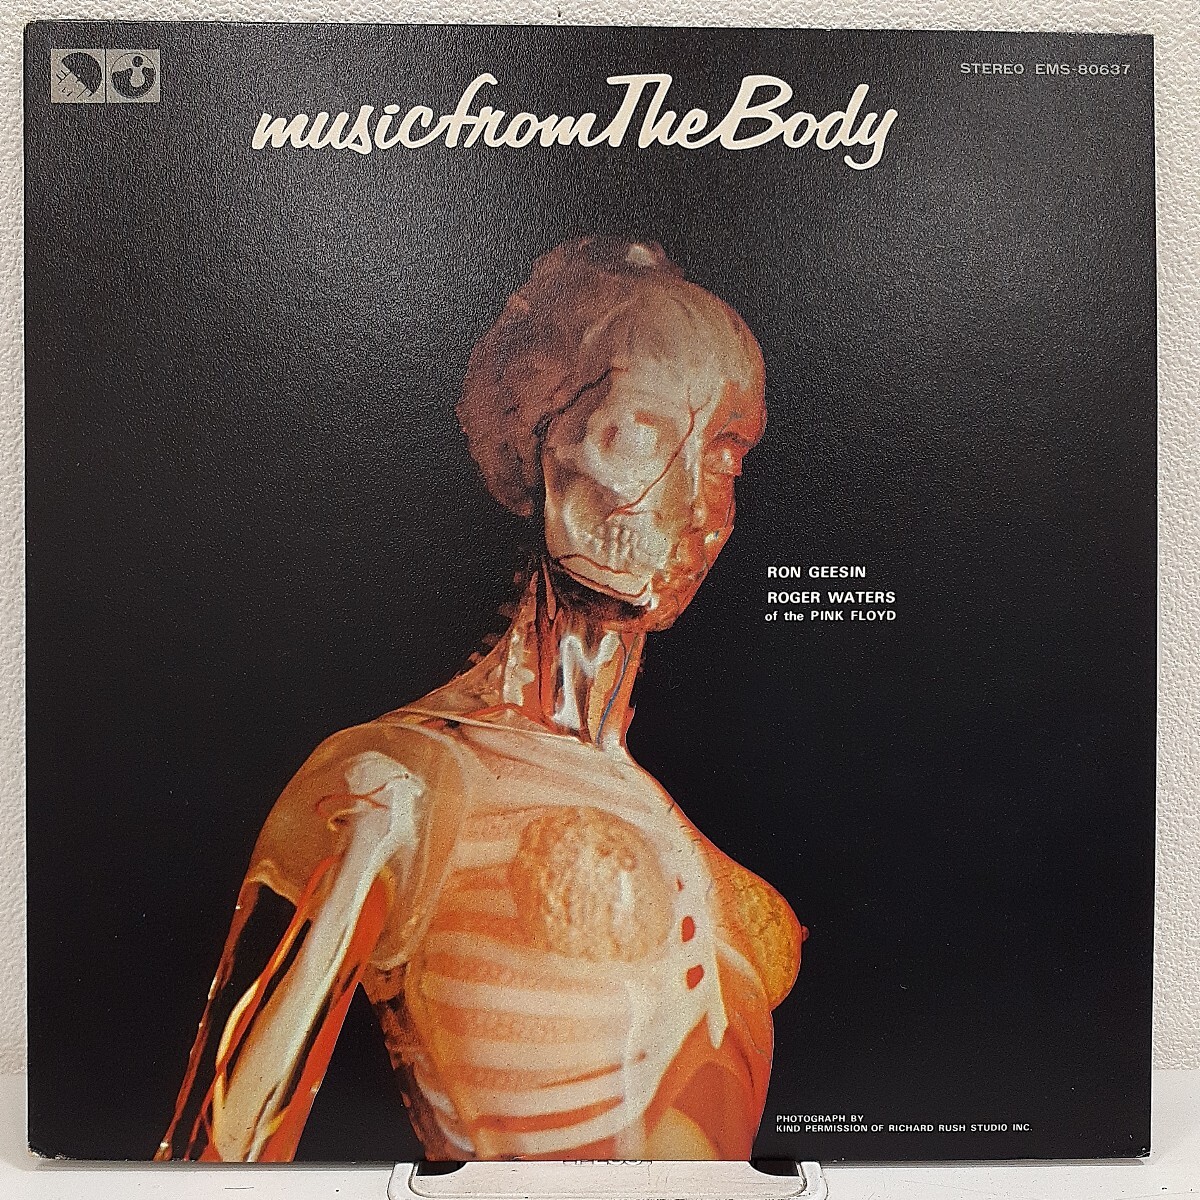 LP Ron Geesin & Roger Waters - music from THE BODY / ロン・ギーシン ロジャー・ウォーターズ - 肉体 / 国内盤 EMS-80637 レコード_画像1